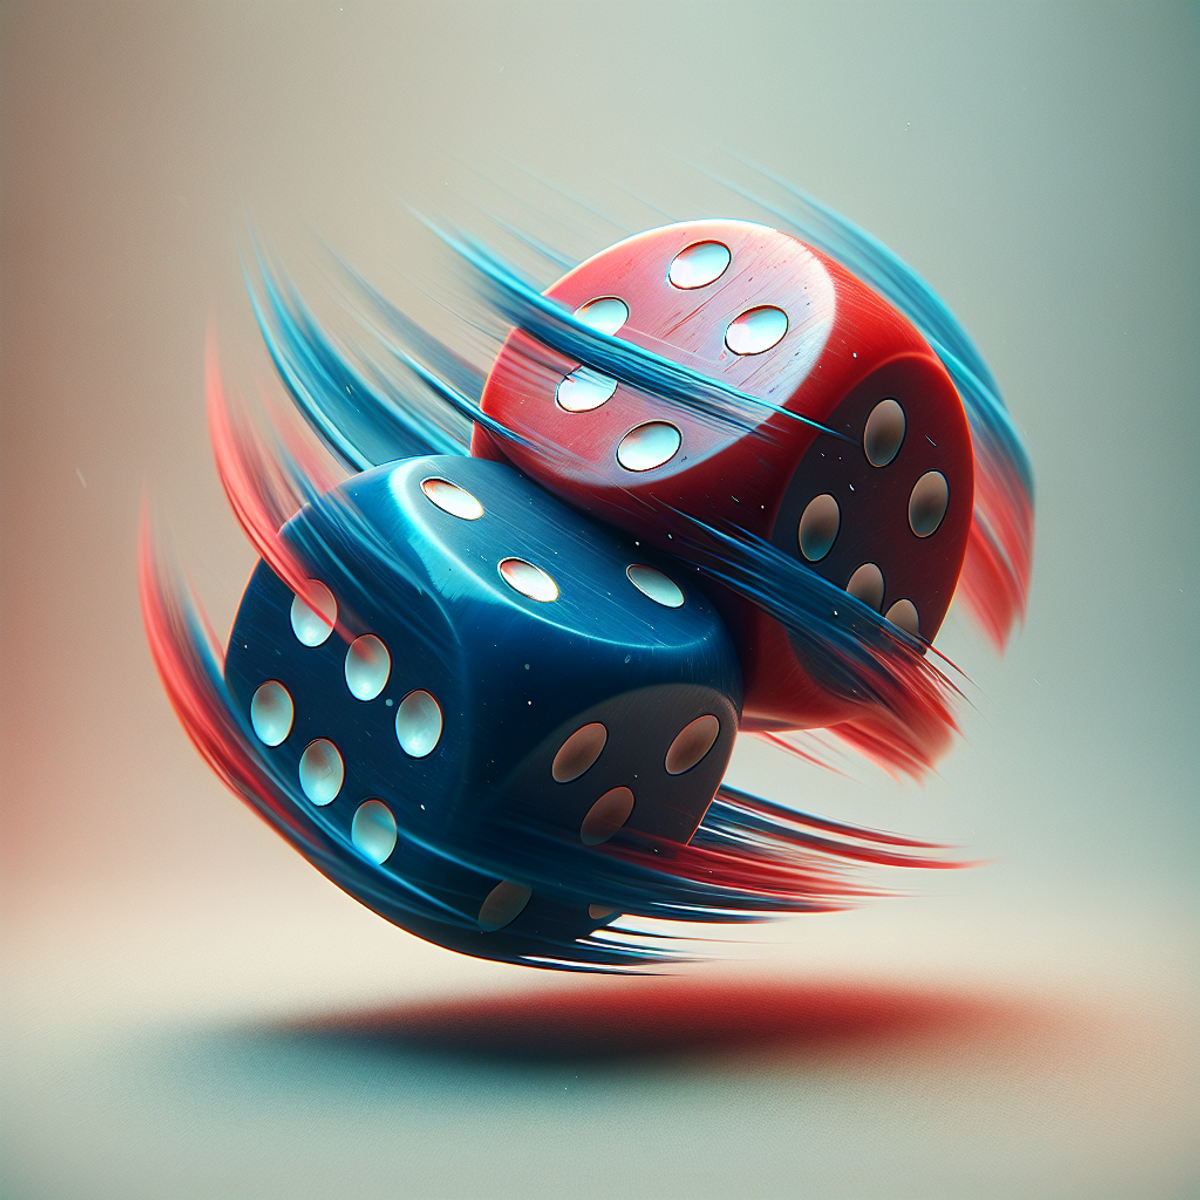 Two colorful dice in mid-air, spinning with motion blur.